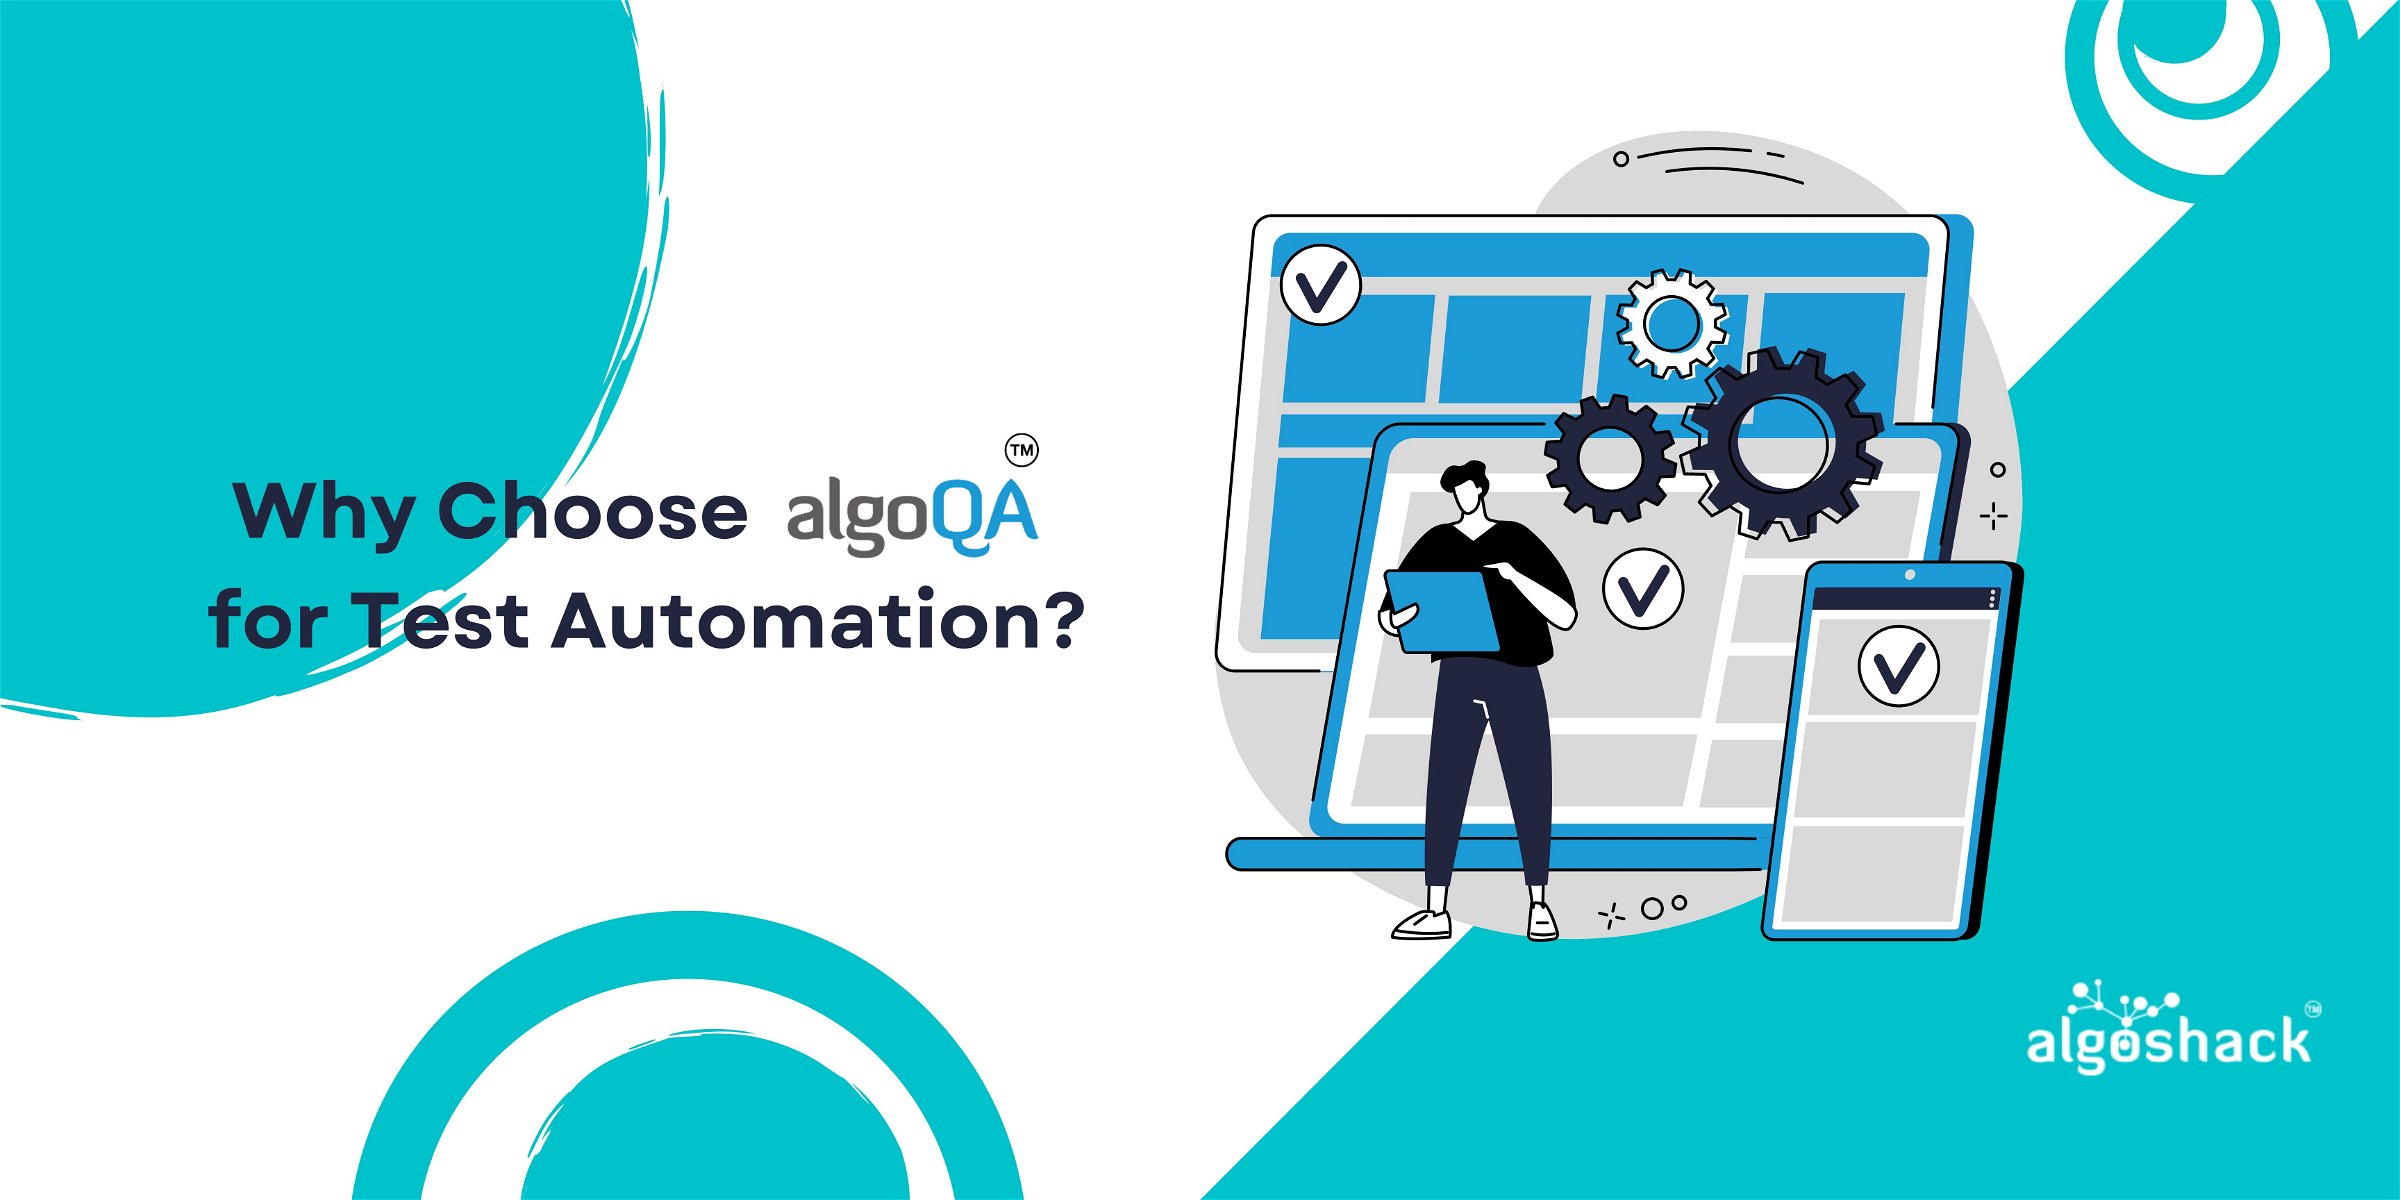 whay choose algoQA for test automation